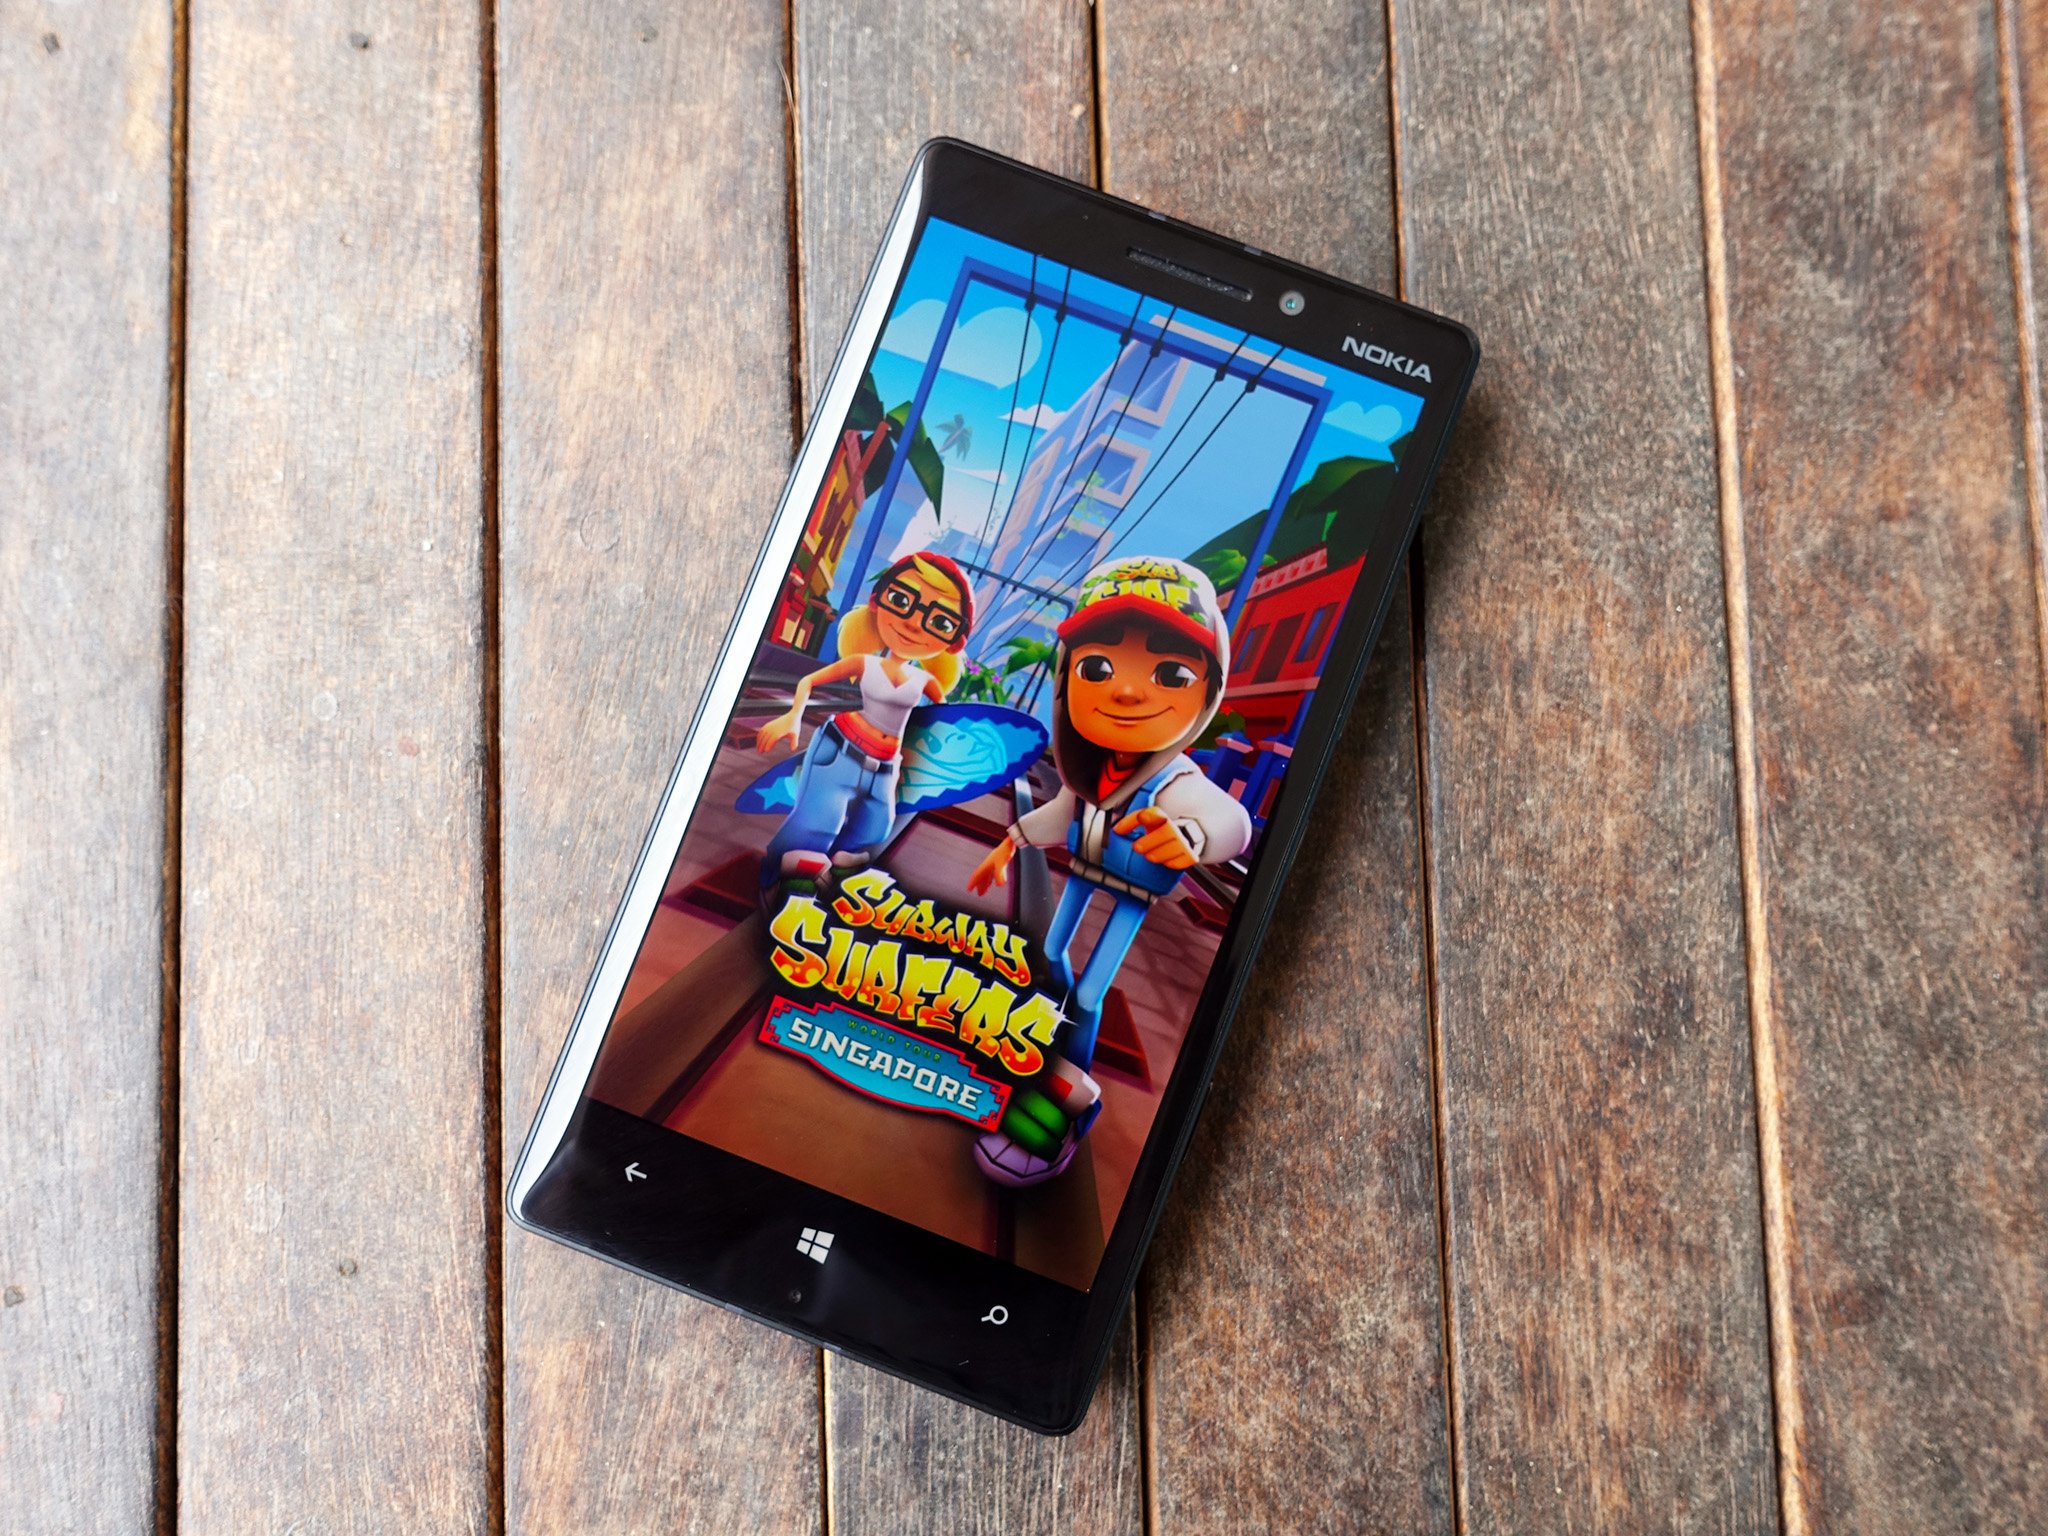 Download Guide Subway Surfers android on PC